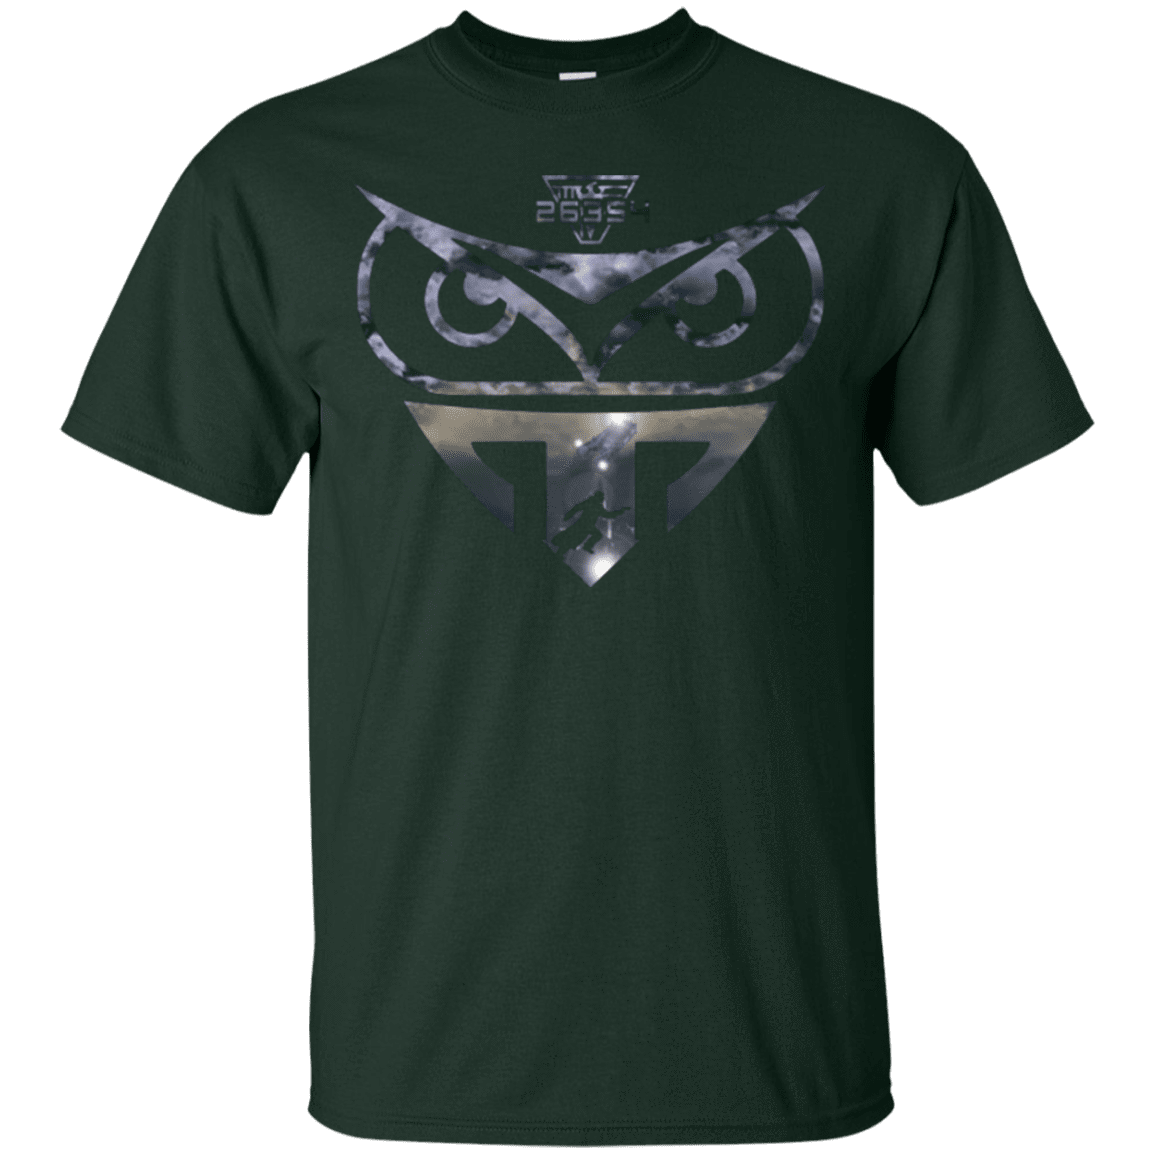 T-Shirts Forest Green / Small Replicant Detective T-Shirt